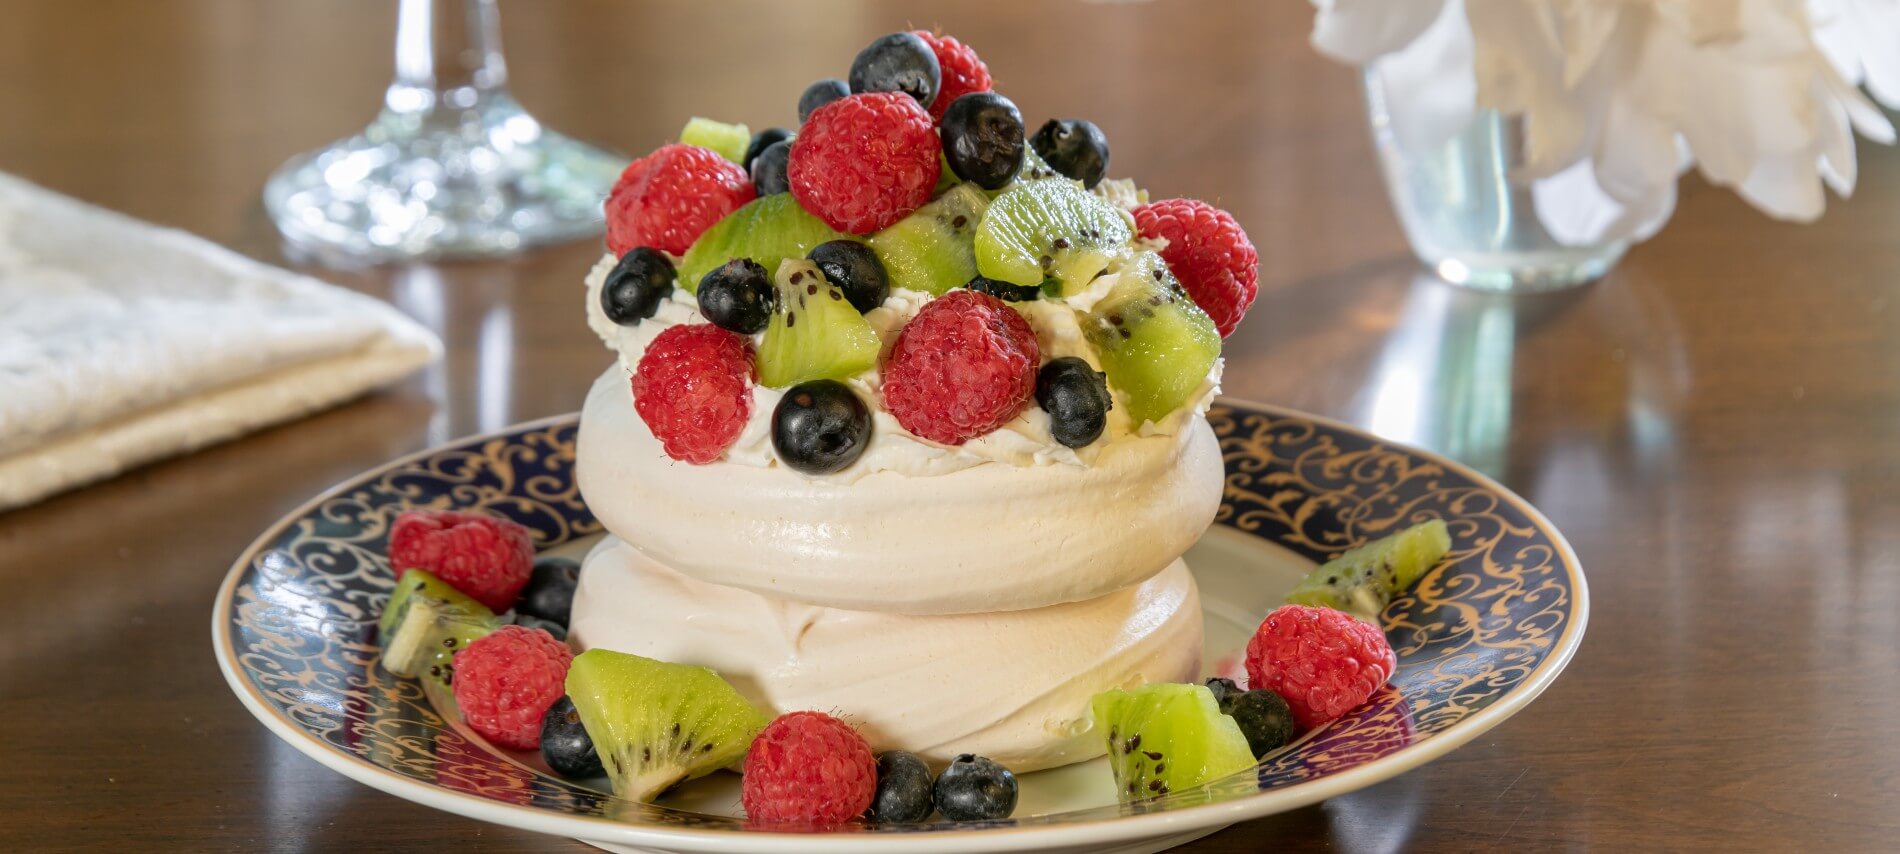 Personal-size pavlova with fruit and whipped cream on a plate